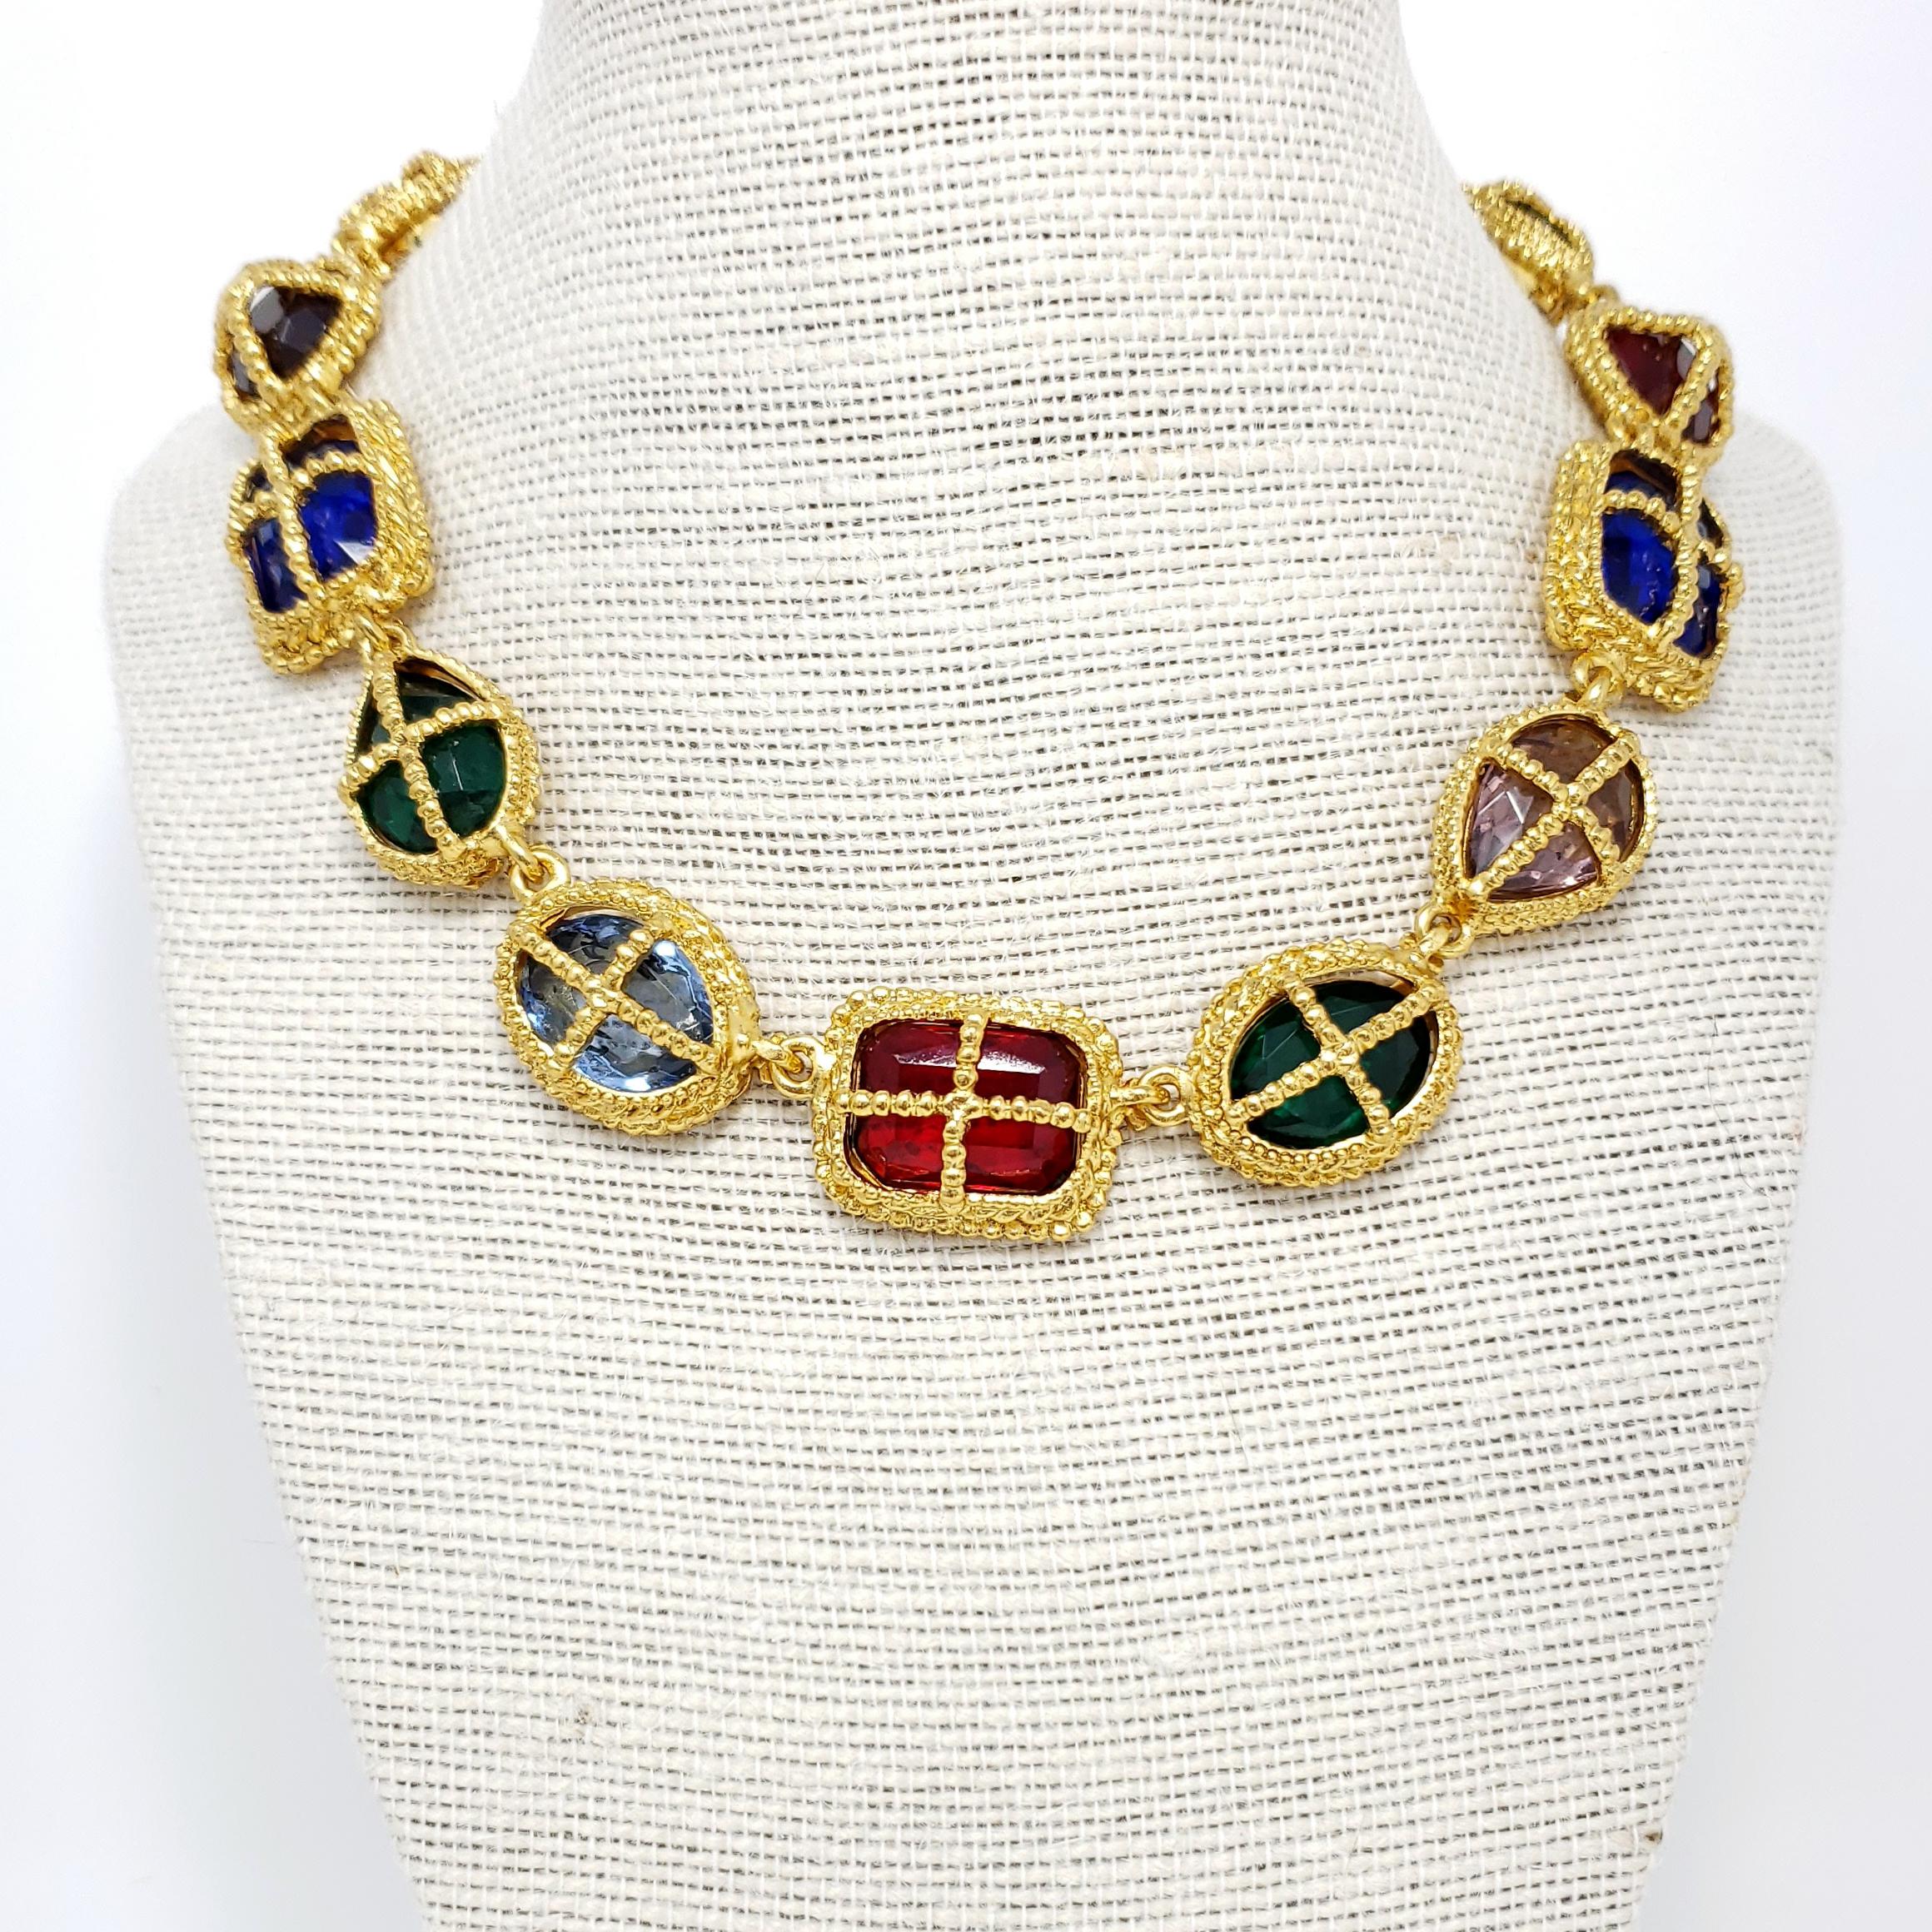 Big bold jewels sit in open-back gold-plated settings in this colorful Kenneth Jay Lane necklace!

Crystals: Ruby, Sapphire, Amethyst, Emerald

Gold plated.

Tags, Marks, Hallmarks: Kenneth Lane

Length: 15.5 inches + 3 inch extension chain